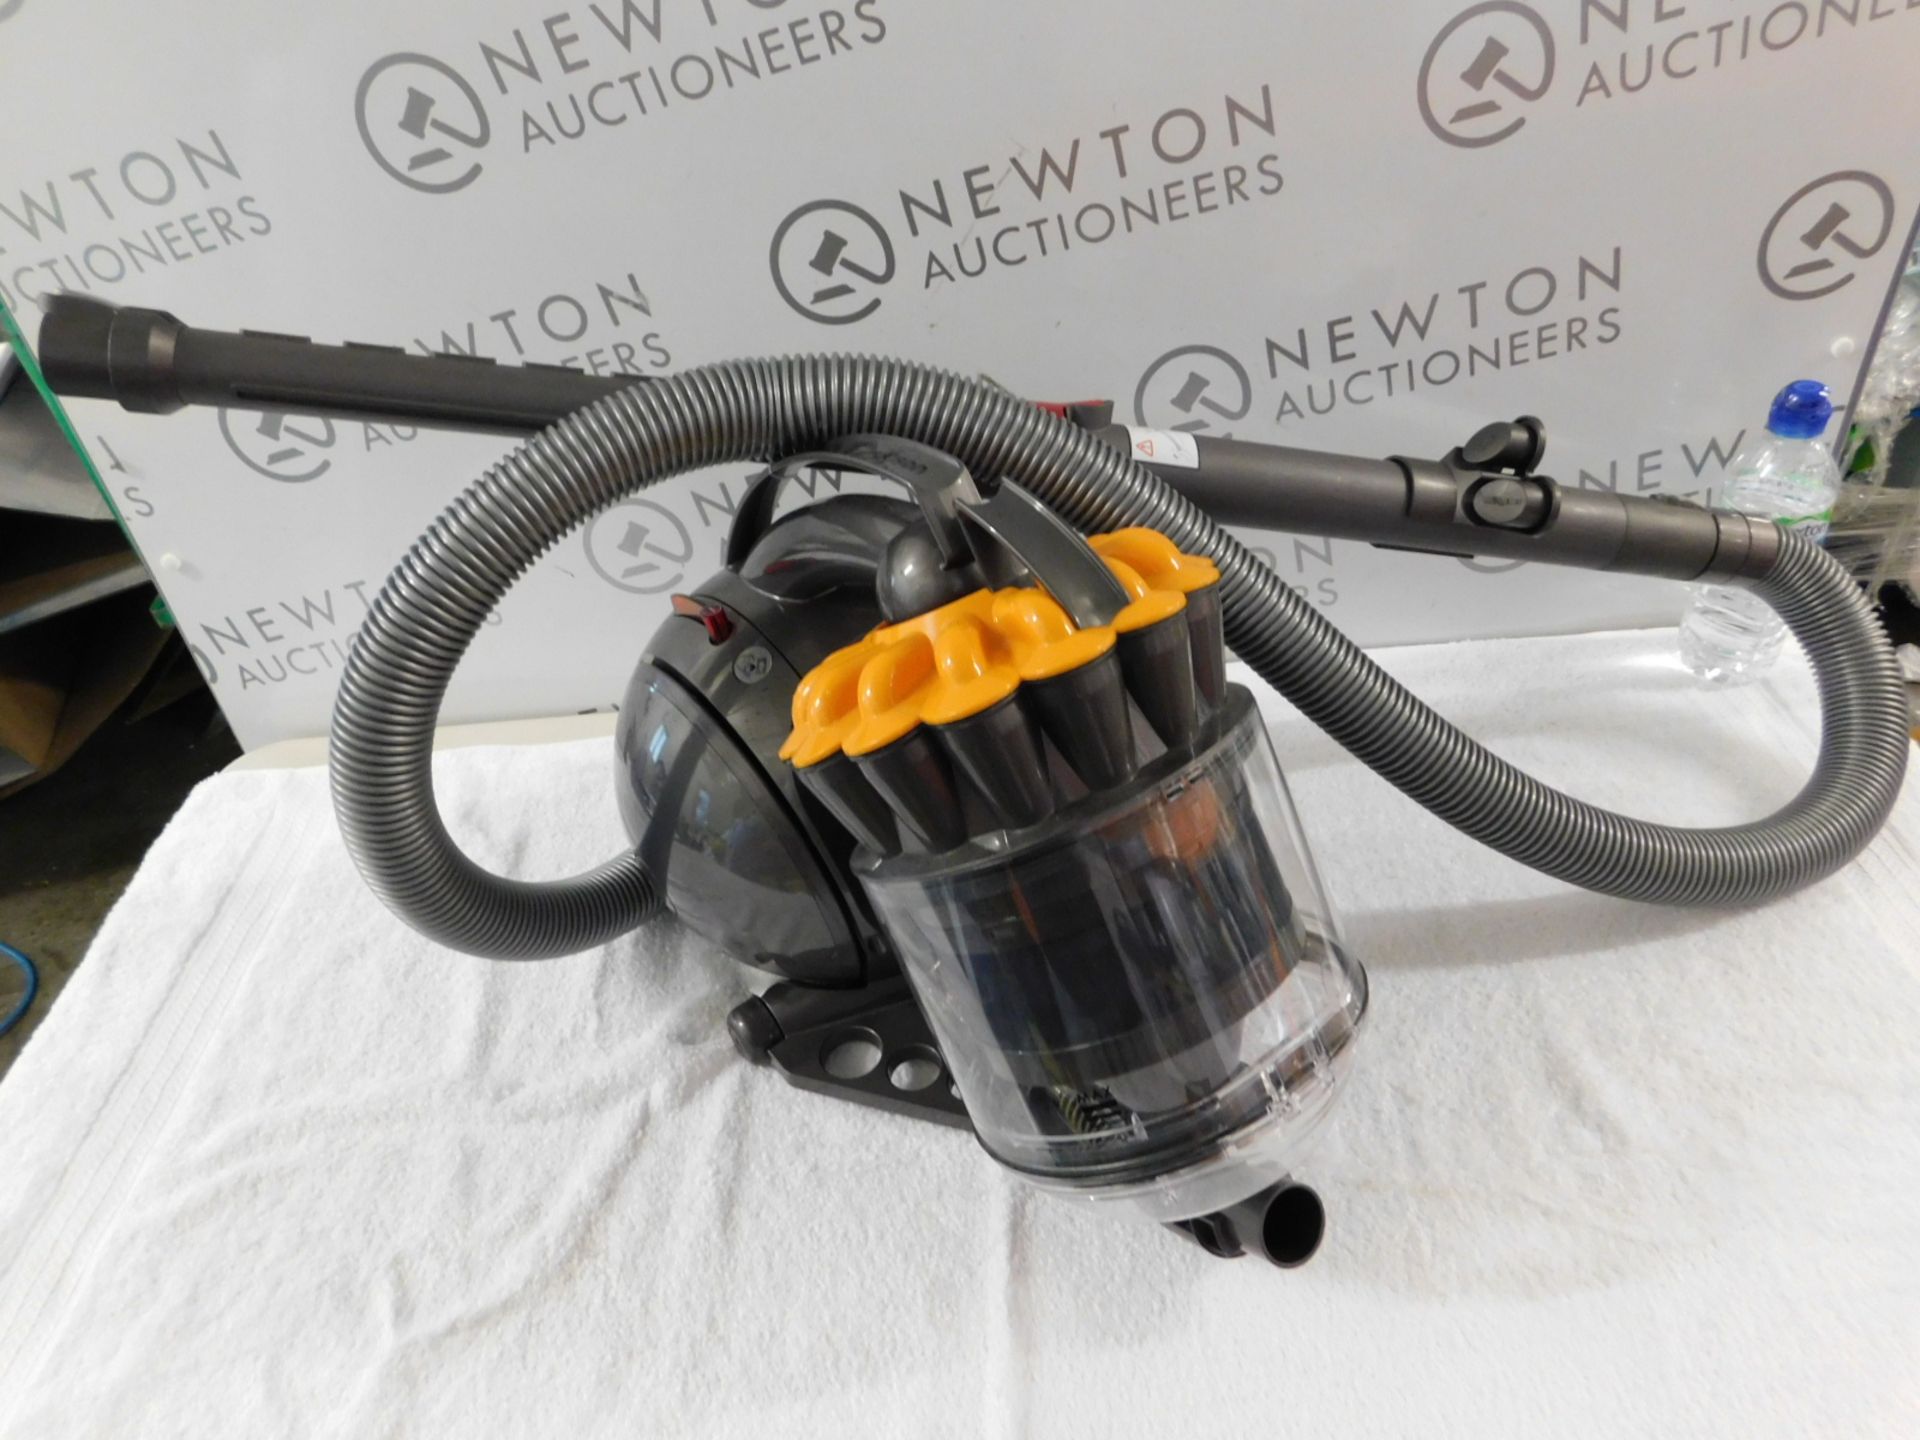 1 DYSON DC54 ANIMAL BALL VACUUM CLEANER RRP £429.99